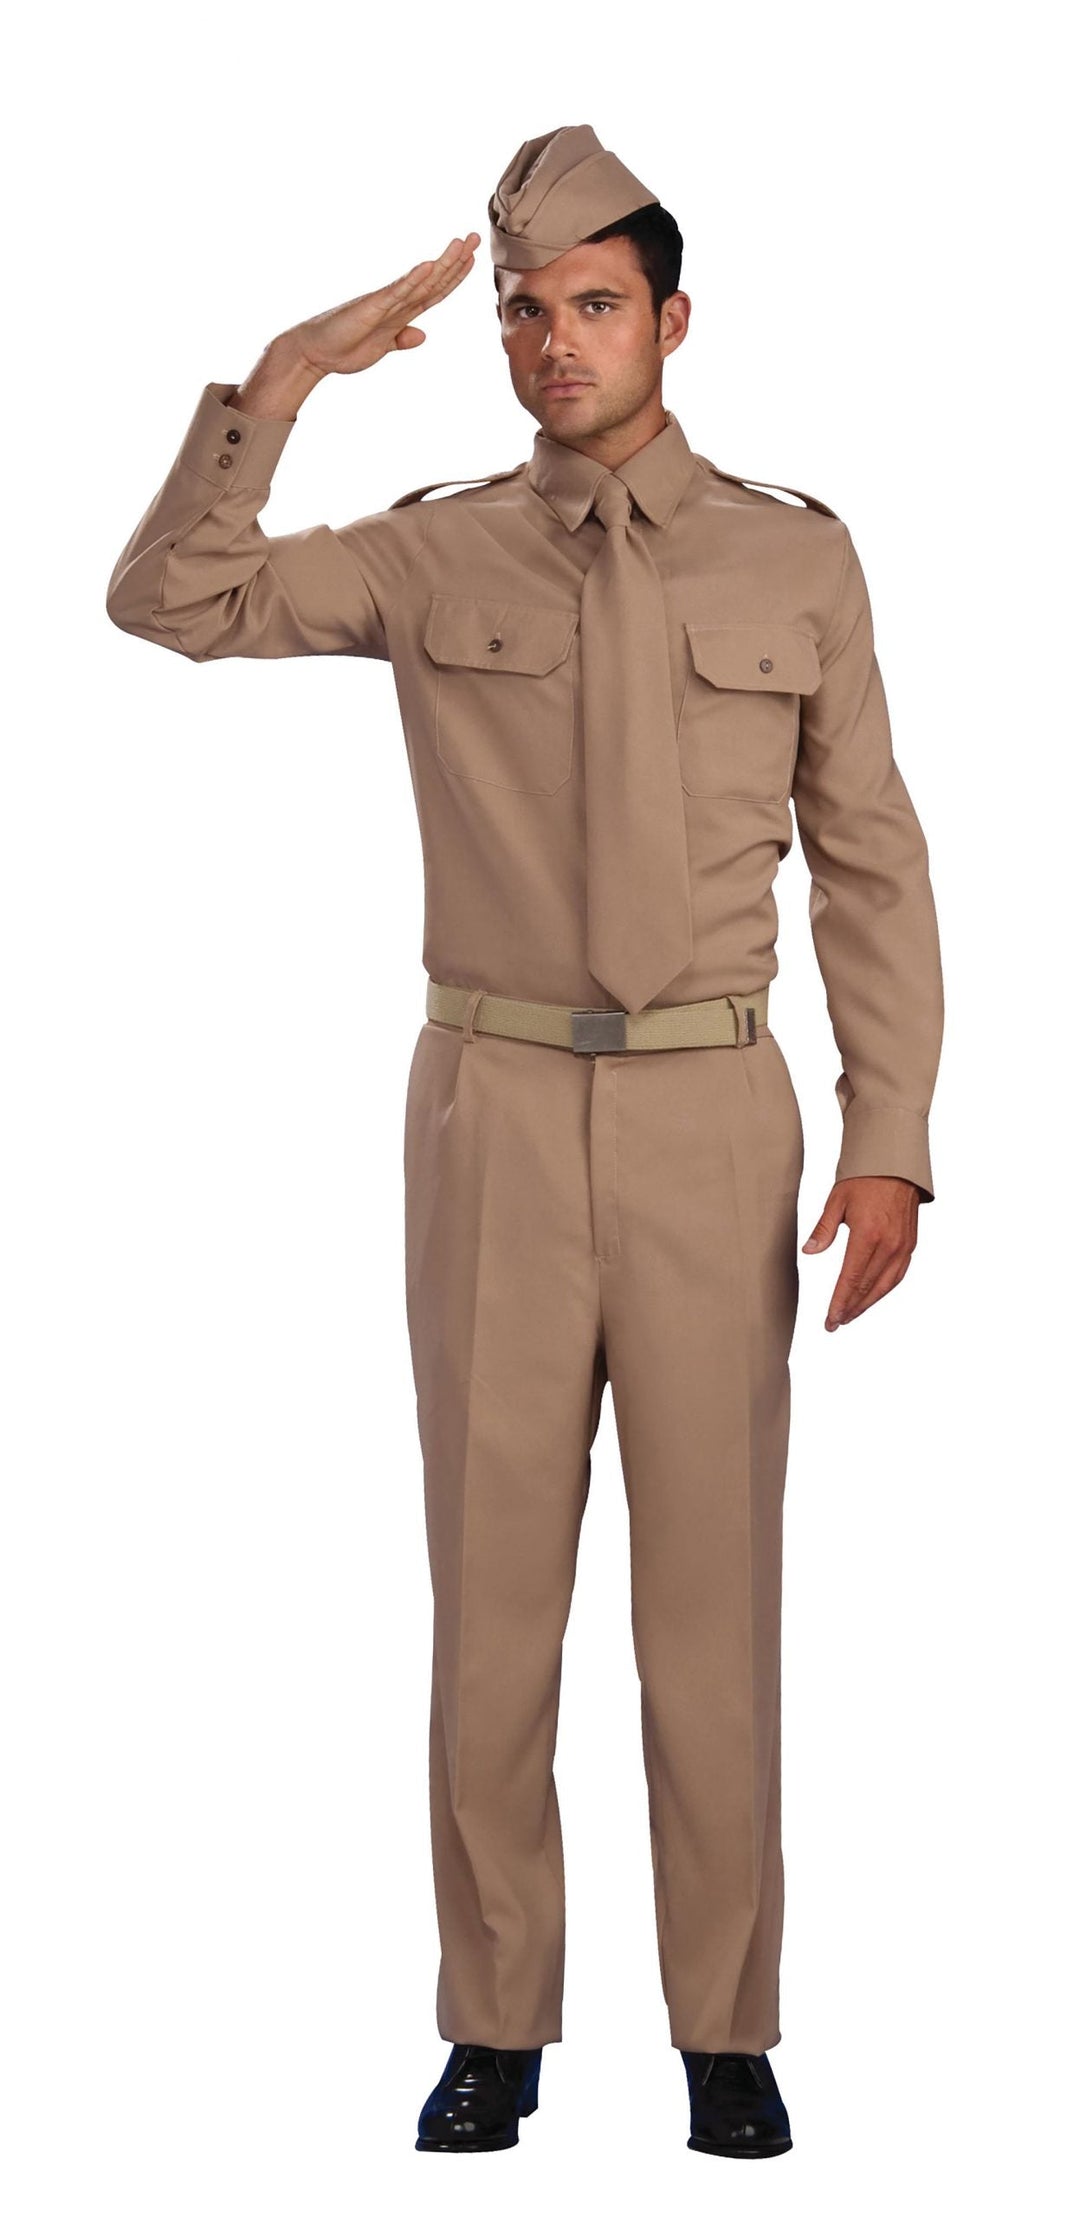 WW2 Private Soldier Adult Costume_1